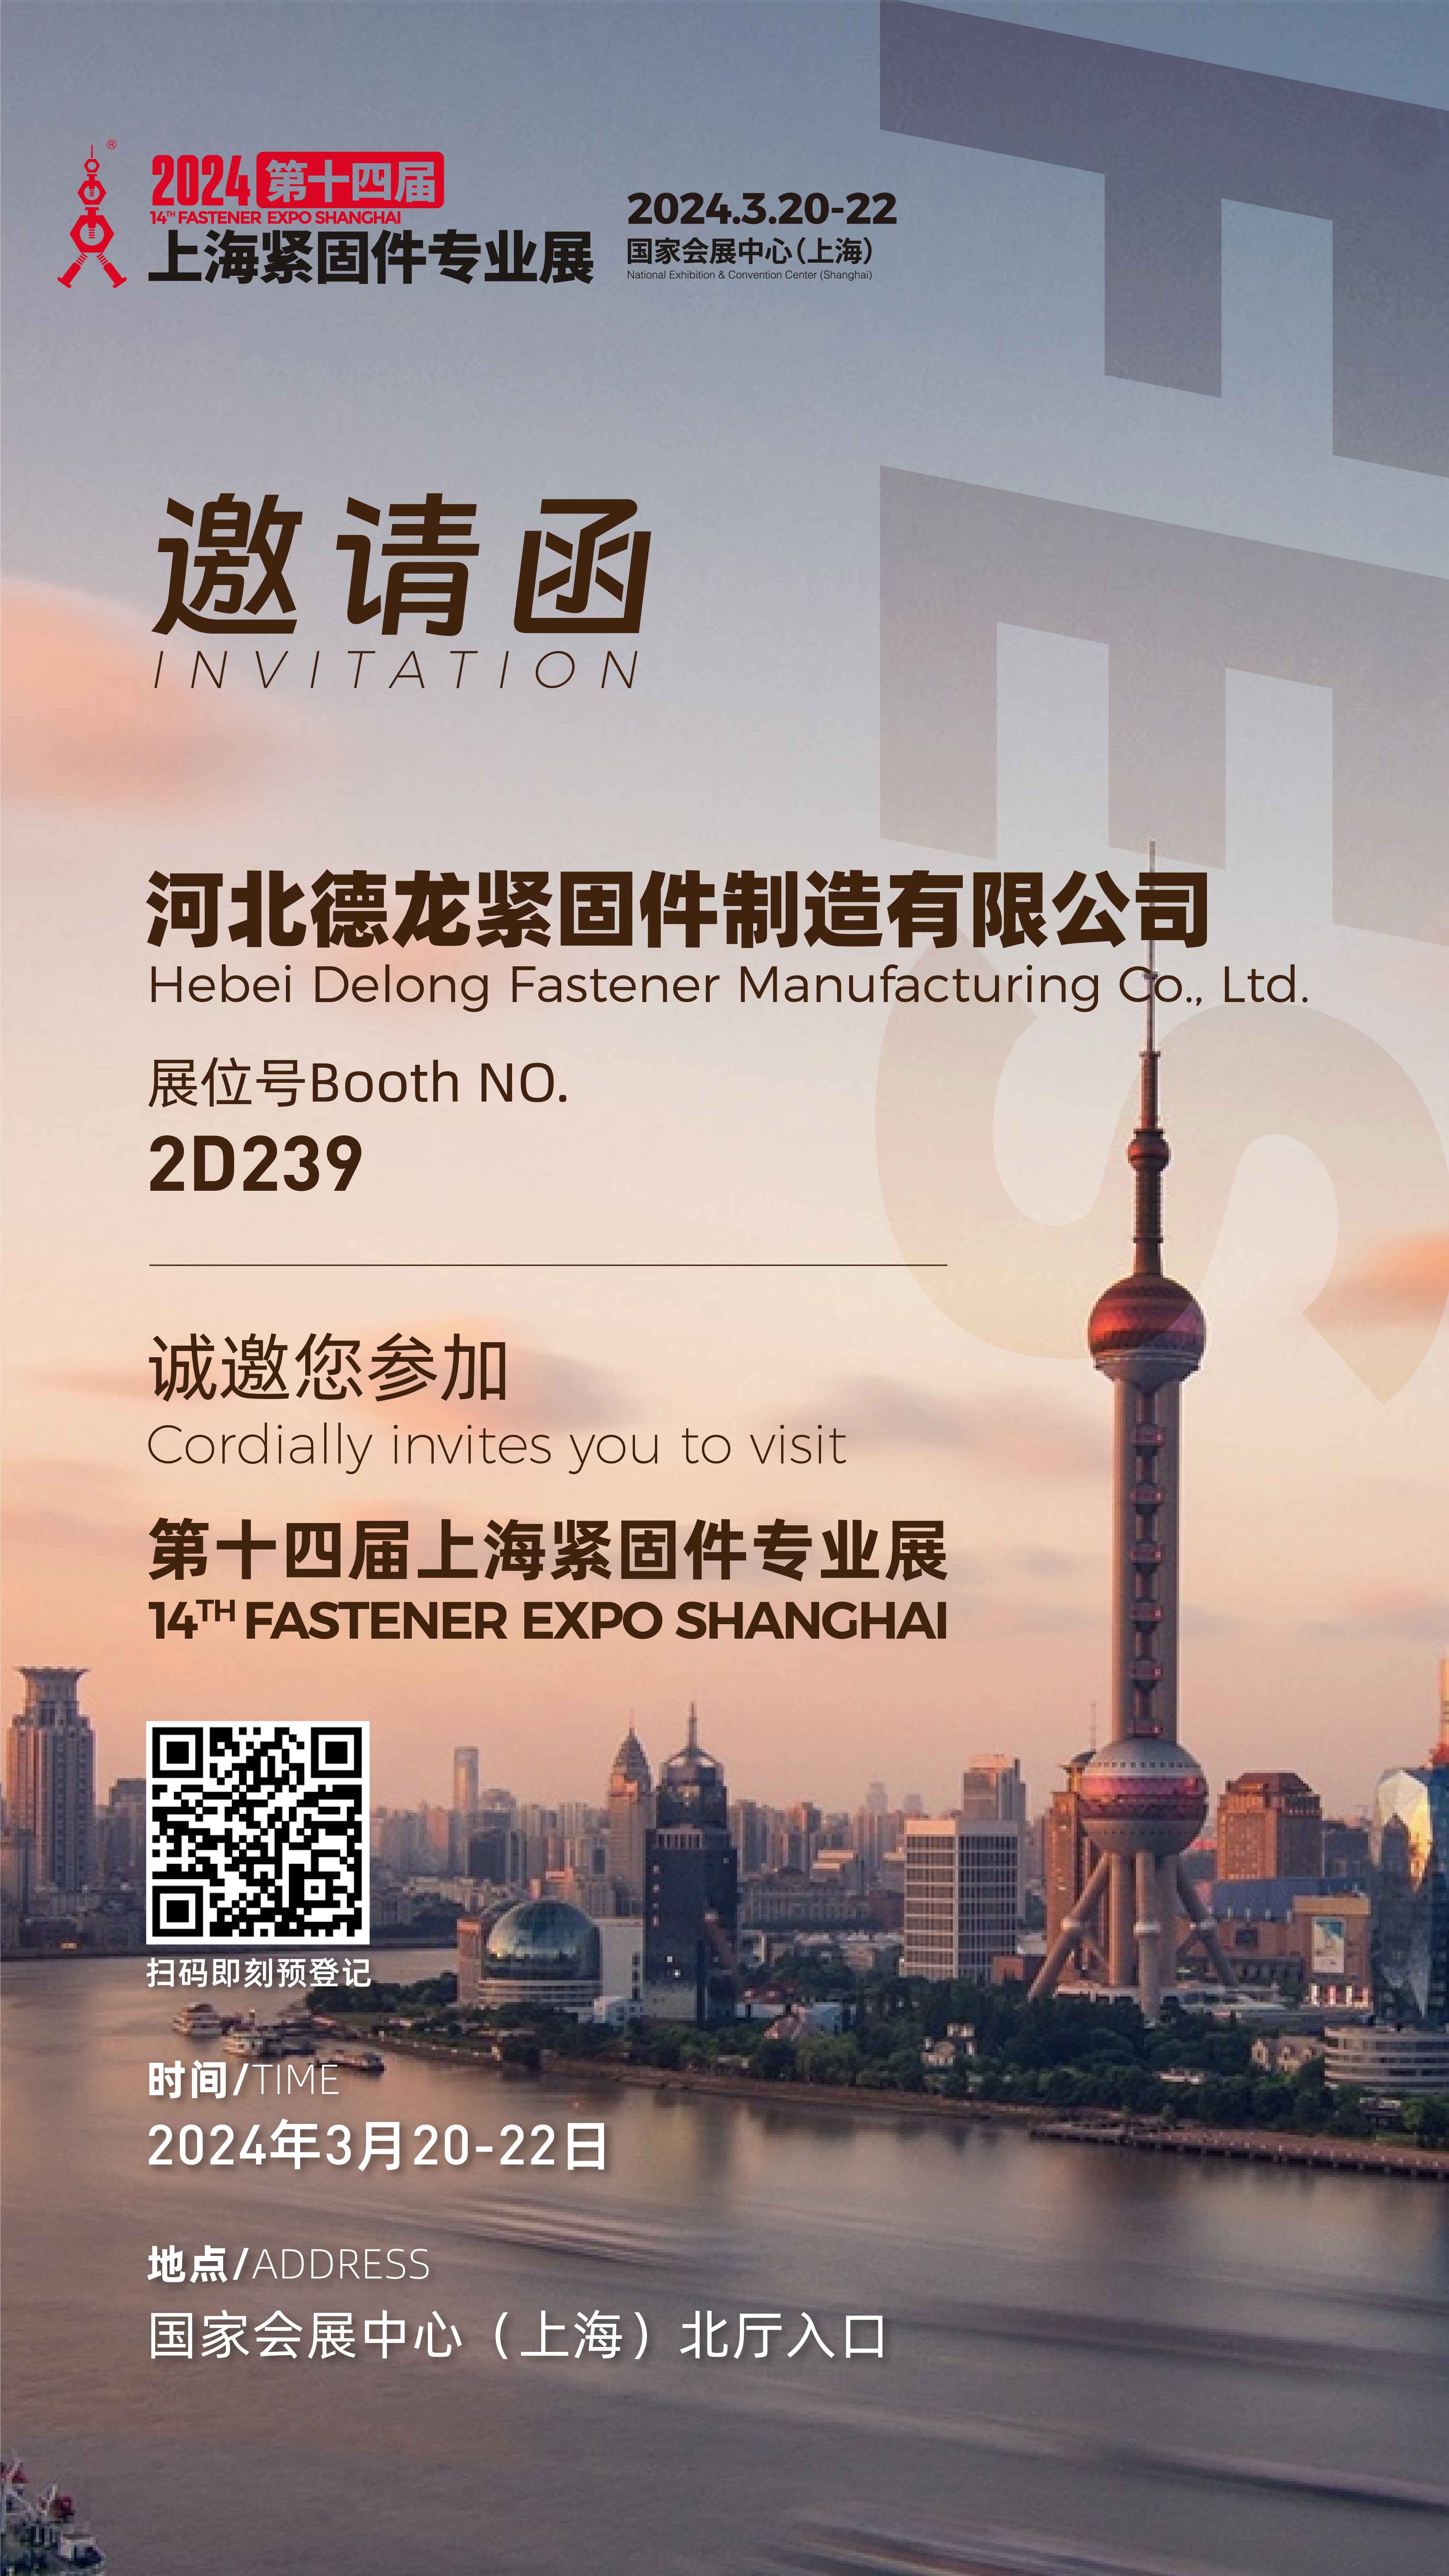 INVITATION ! Welcome to the 14th Fastener Expo ShangHai on March 20-22,2024